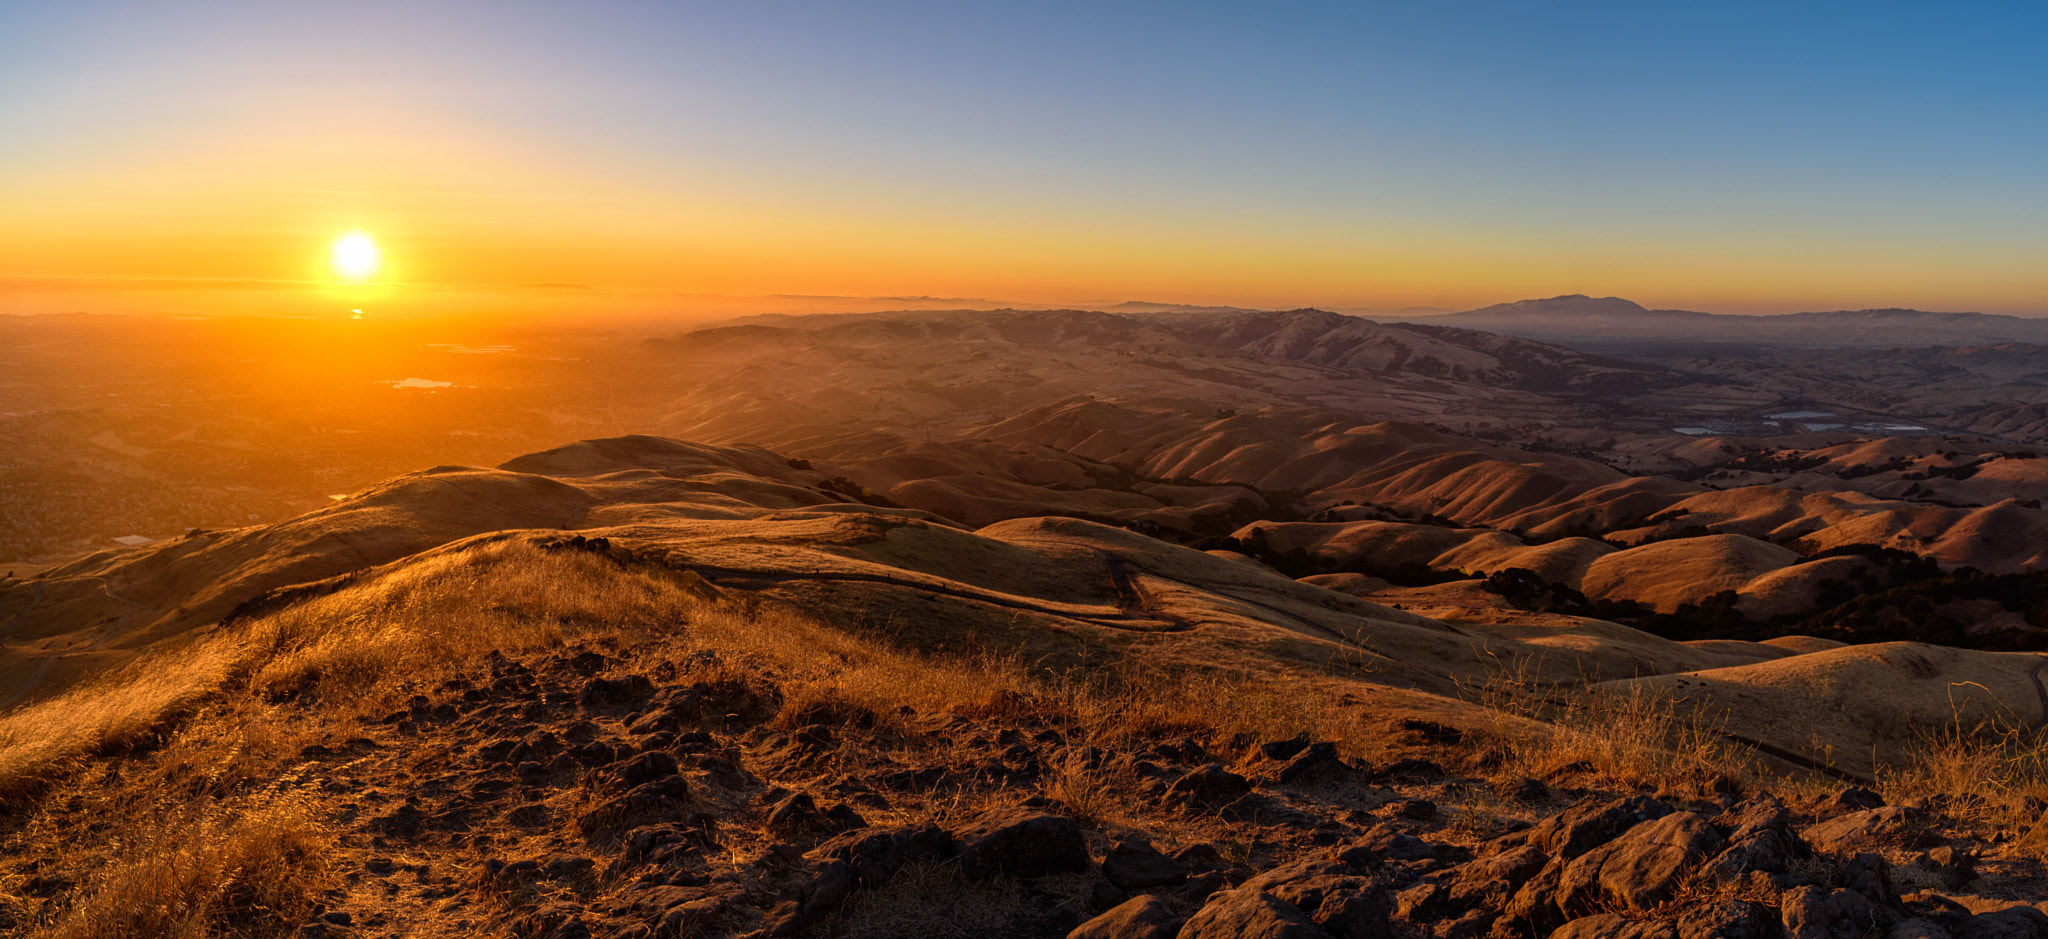 ZEISS Milvus 21mm F2.8 sample photo. Sunset at mission peak photography